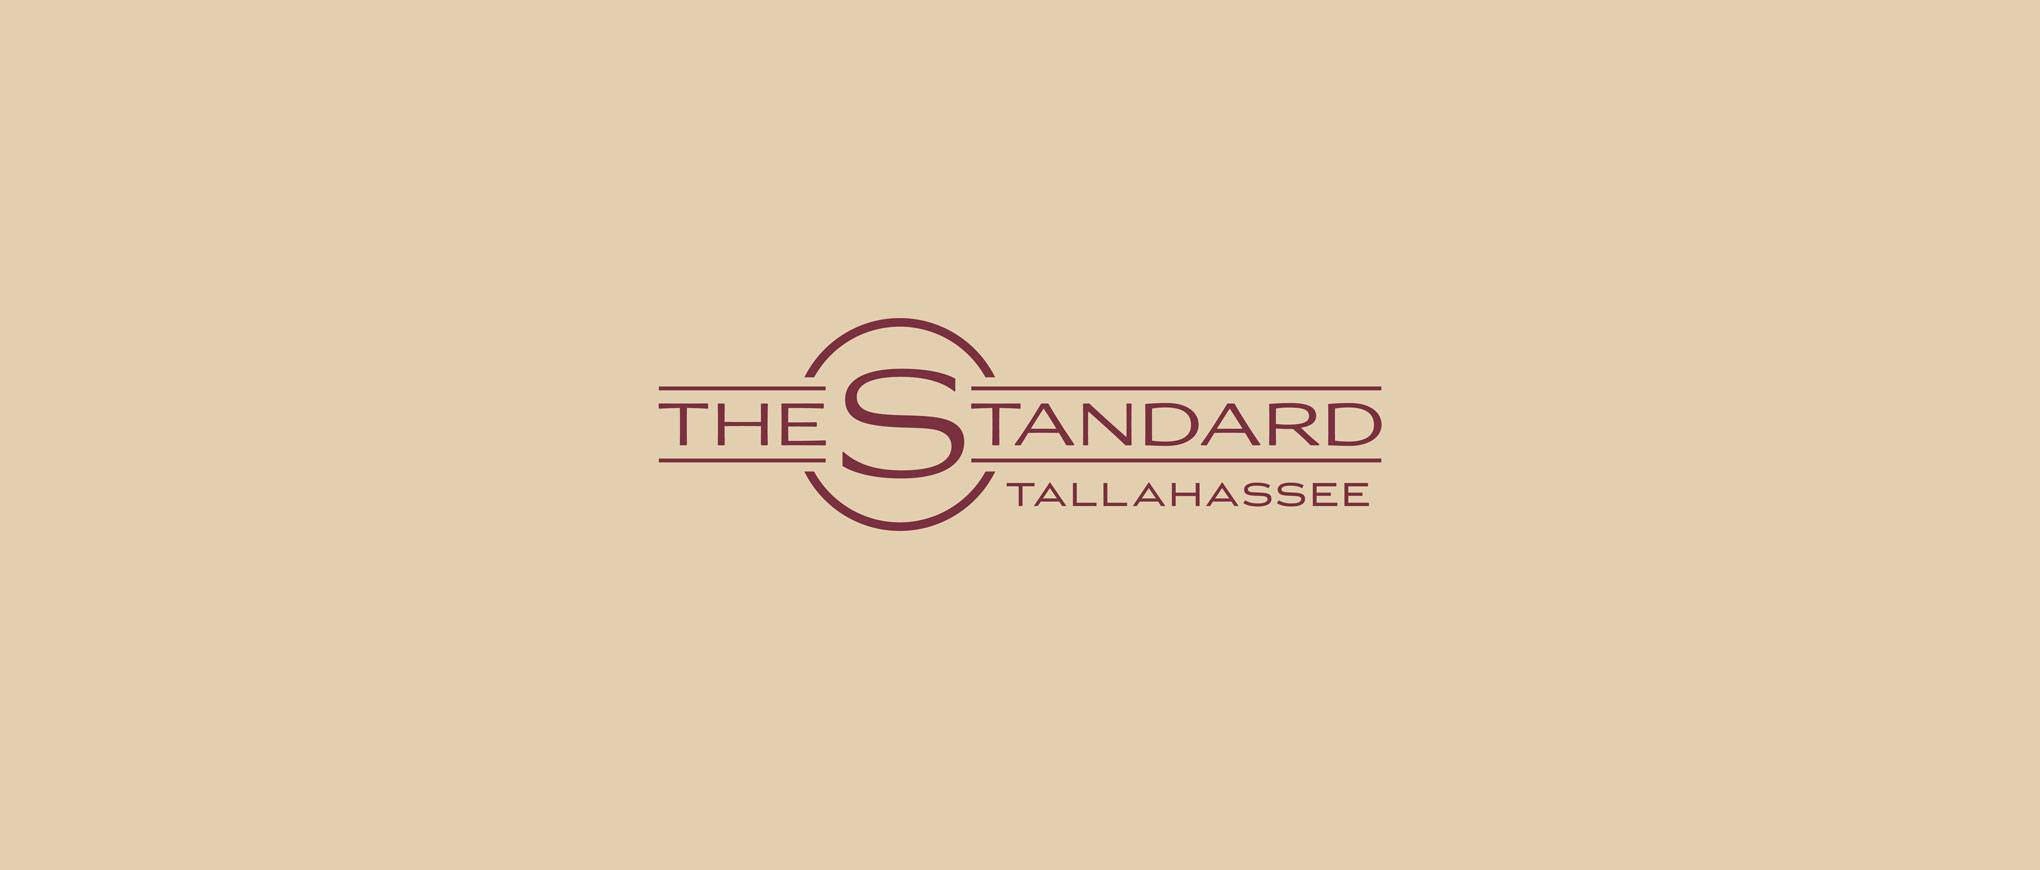 The Standard Tallahassee